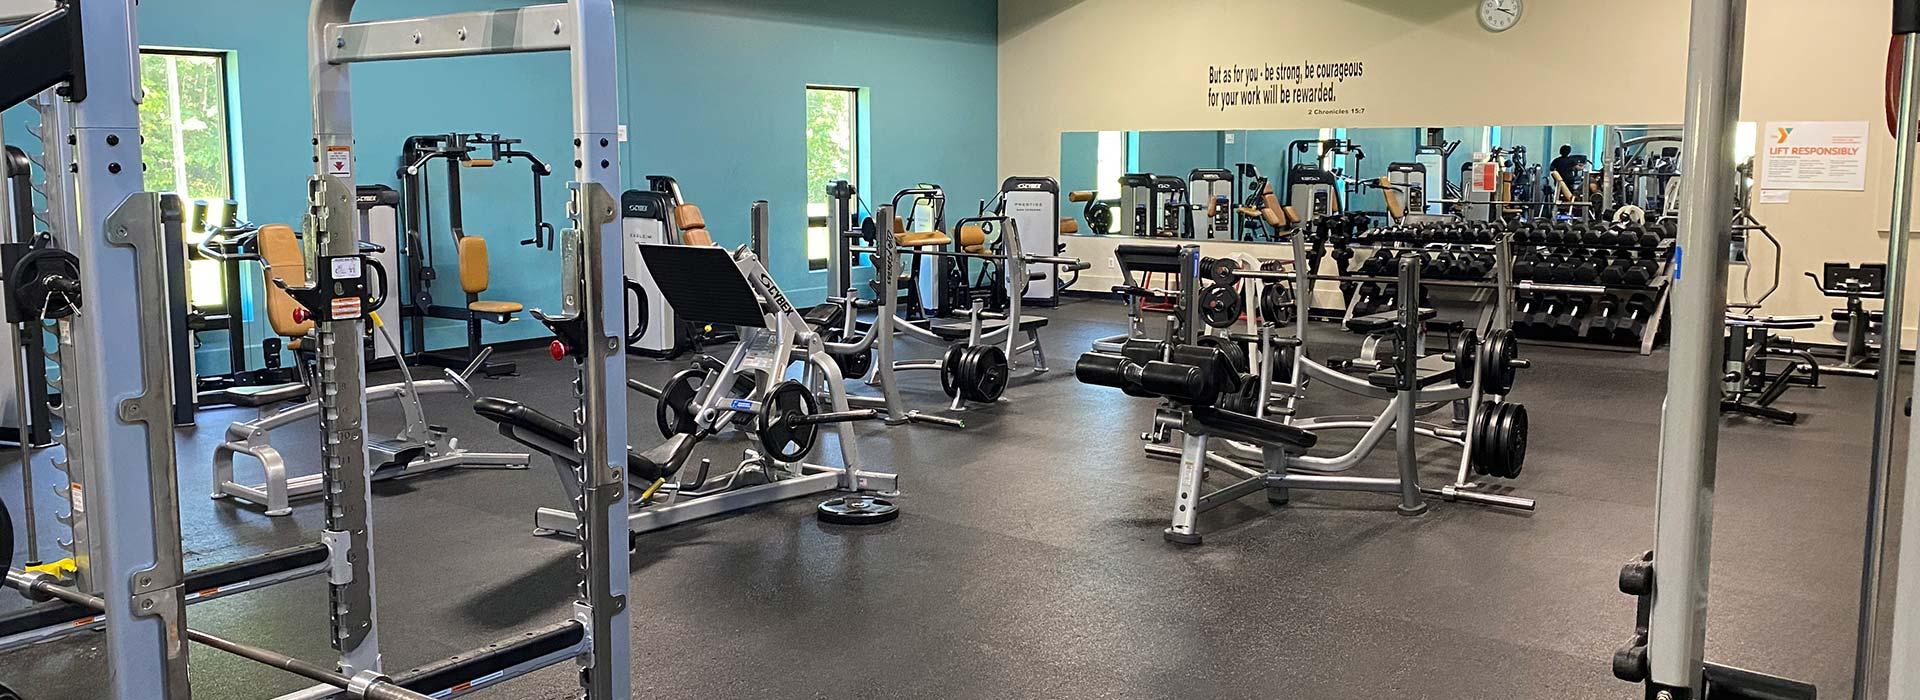 Free weights in the fitness center of the YMCA of South Boston/Halifax County